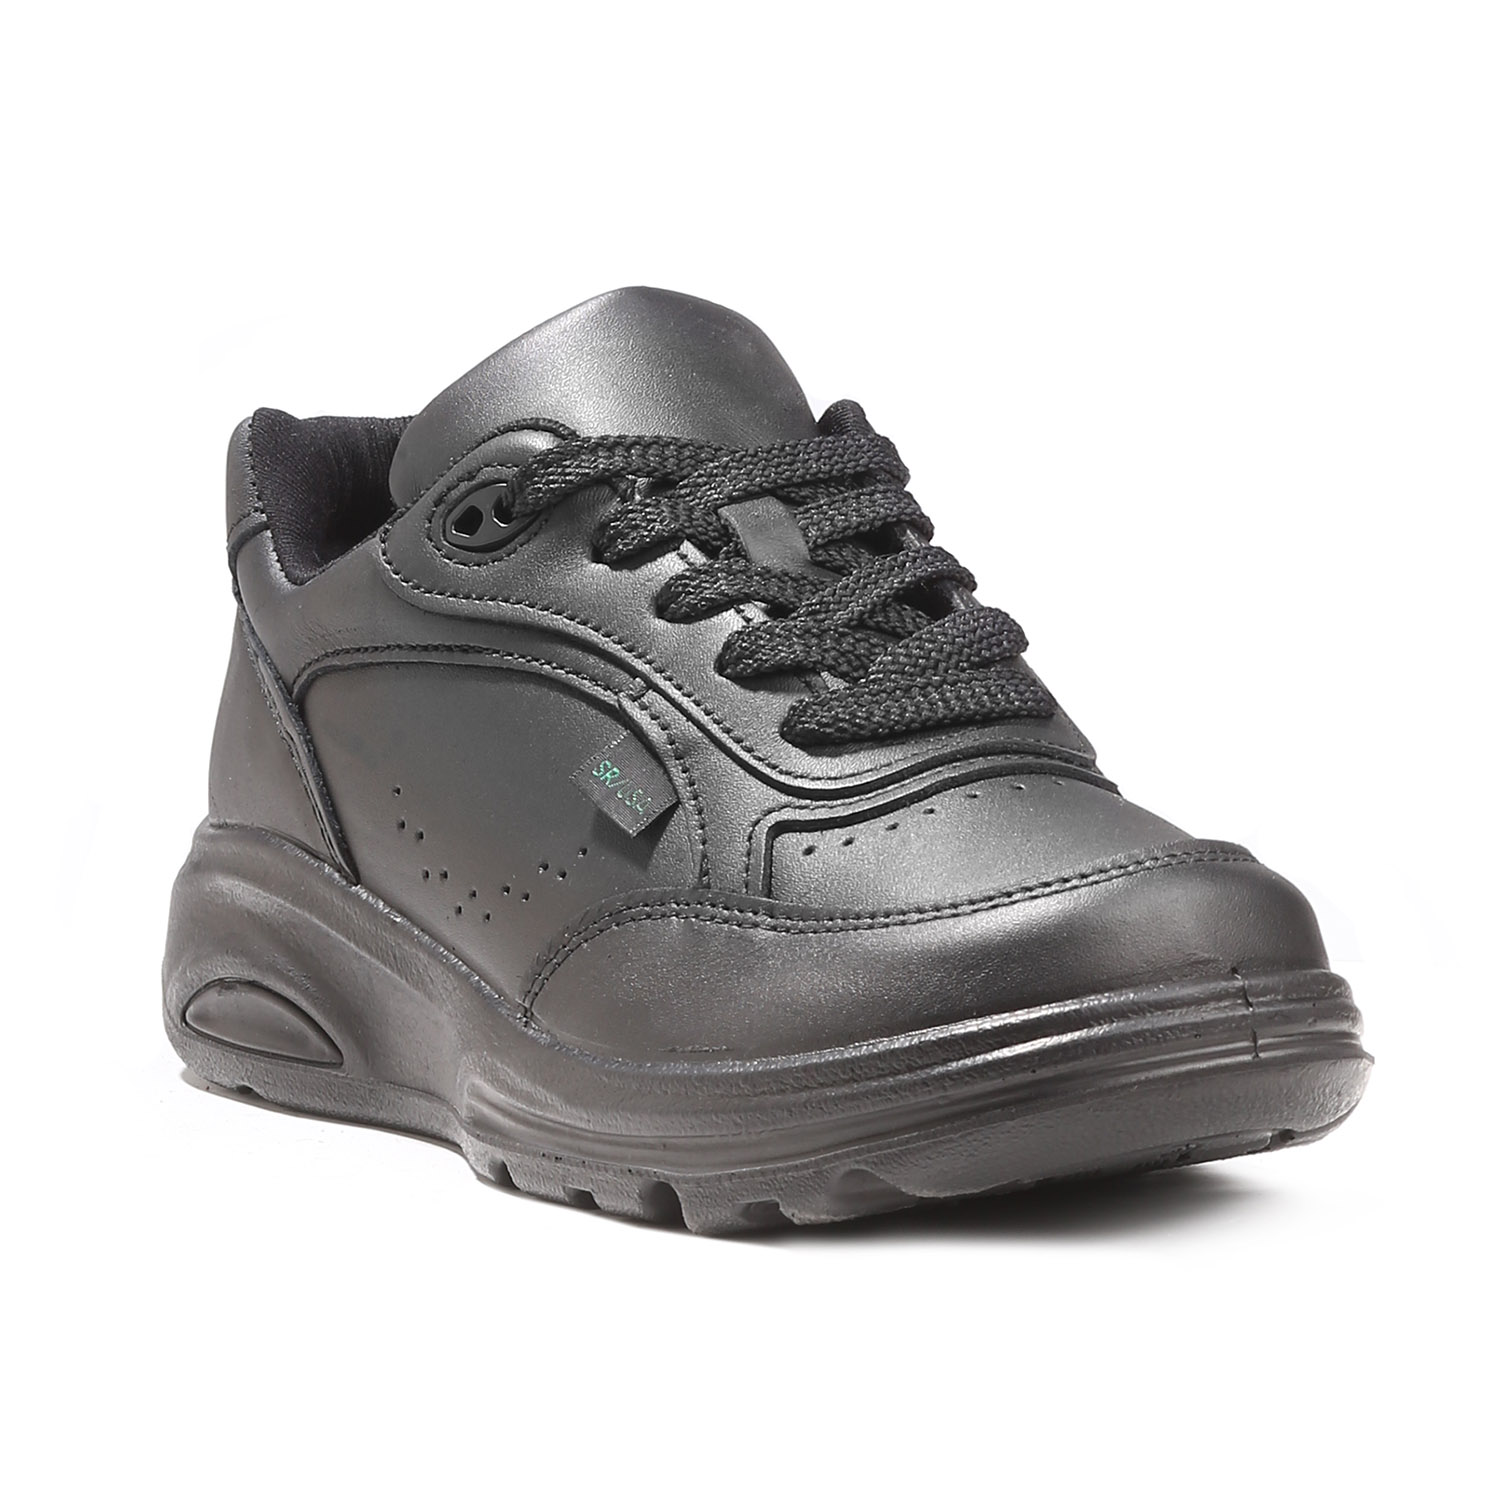 Ladies' New Balance Postal Walking Shoe for Letter Carriers